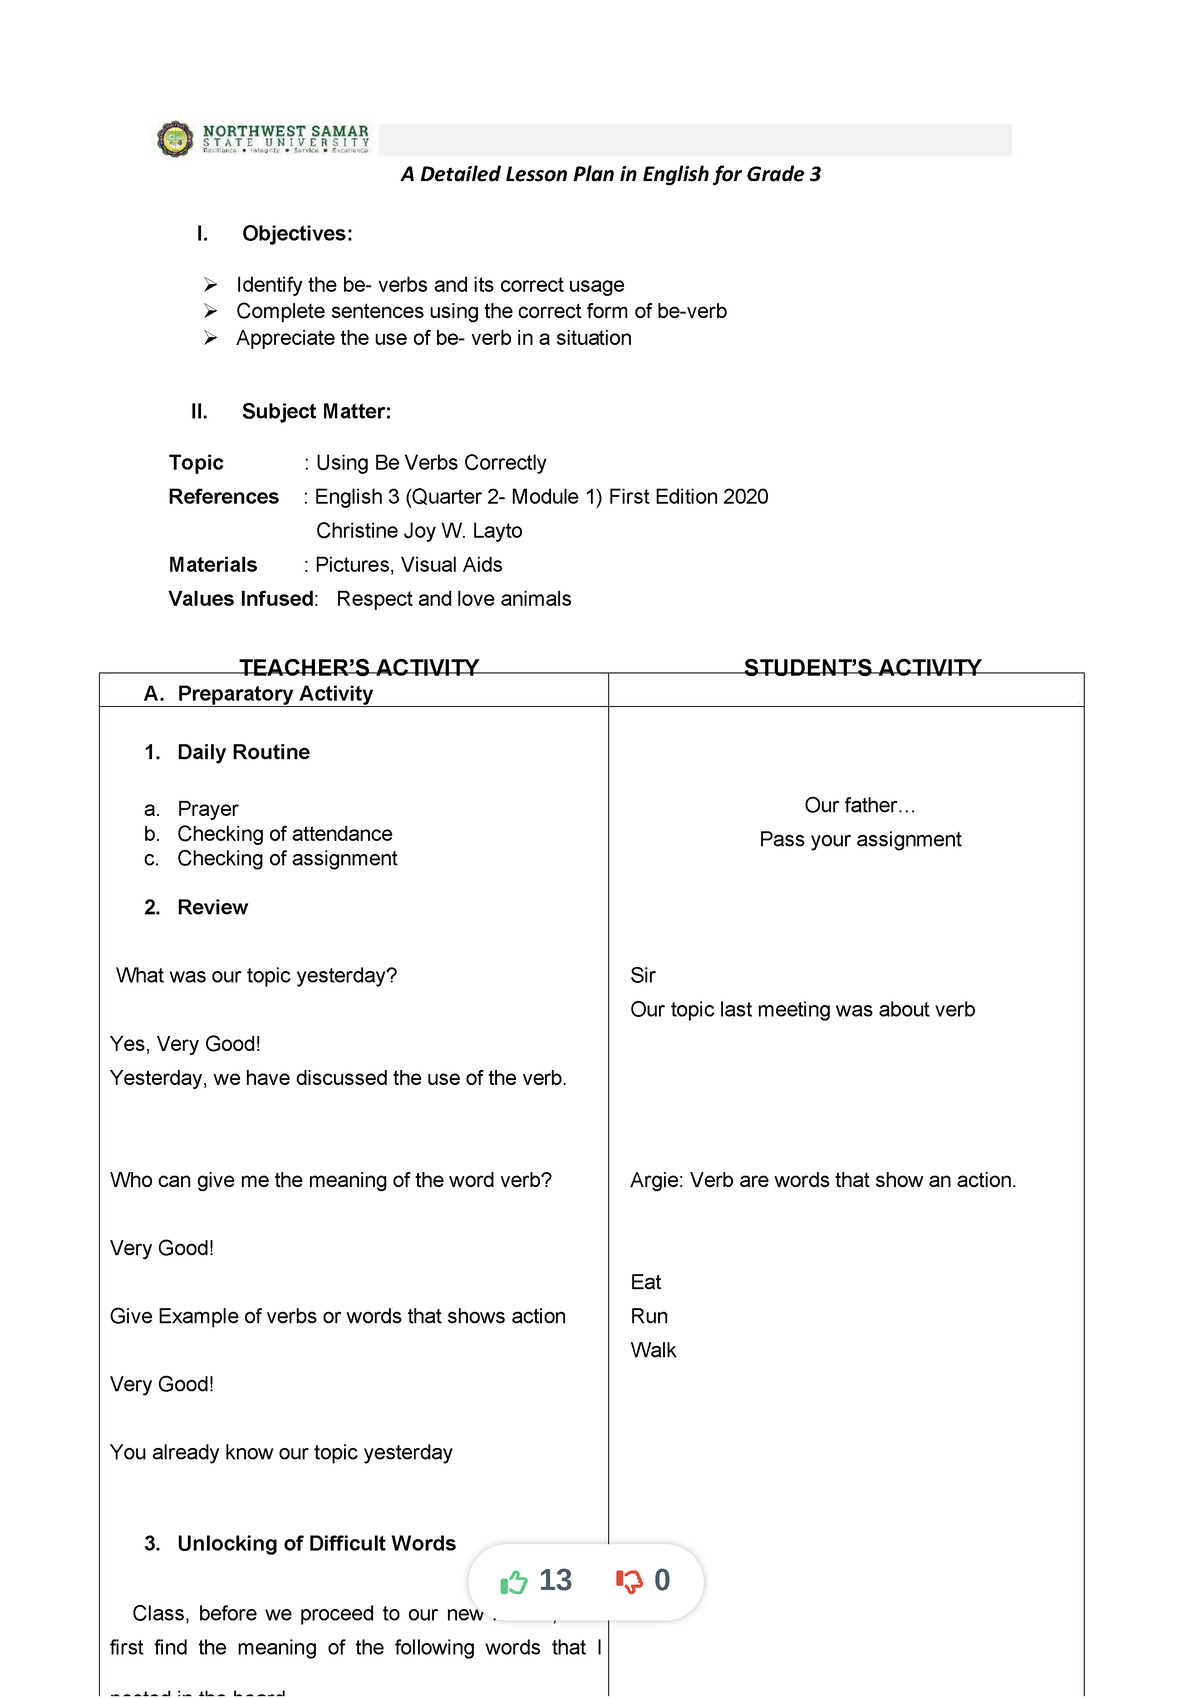 A-detailed-lesson-plan-in-english-for-grade-3-converted compress - A ...